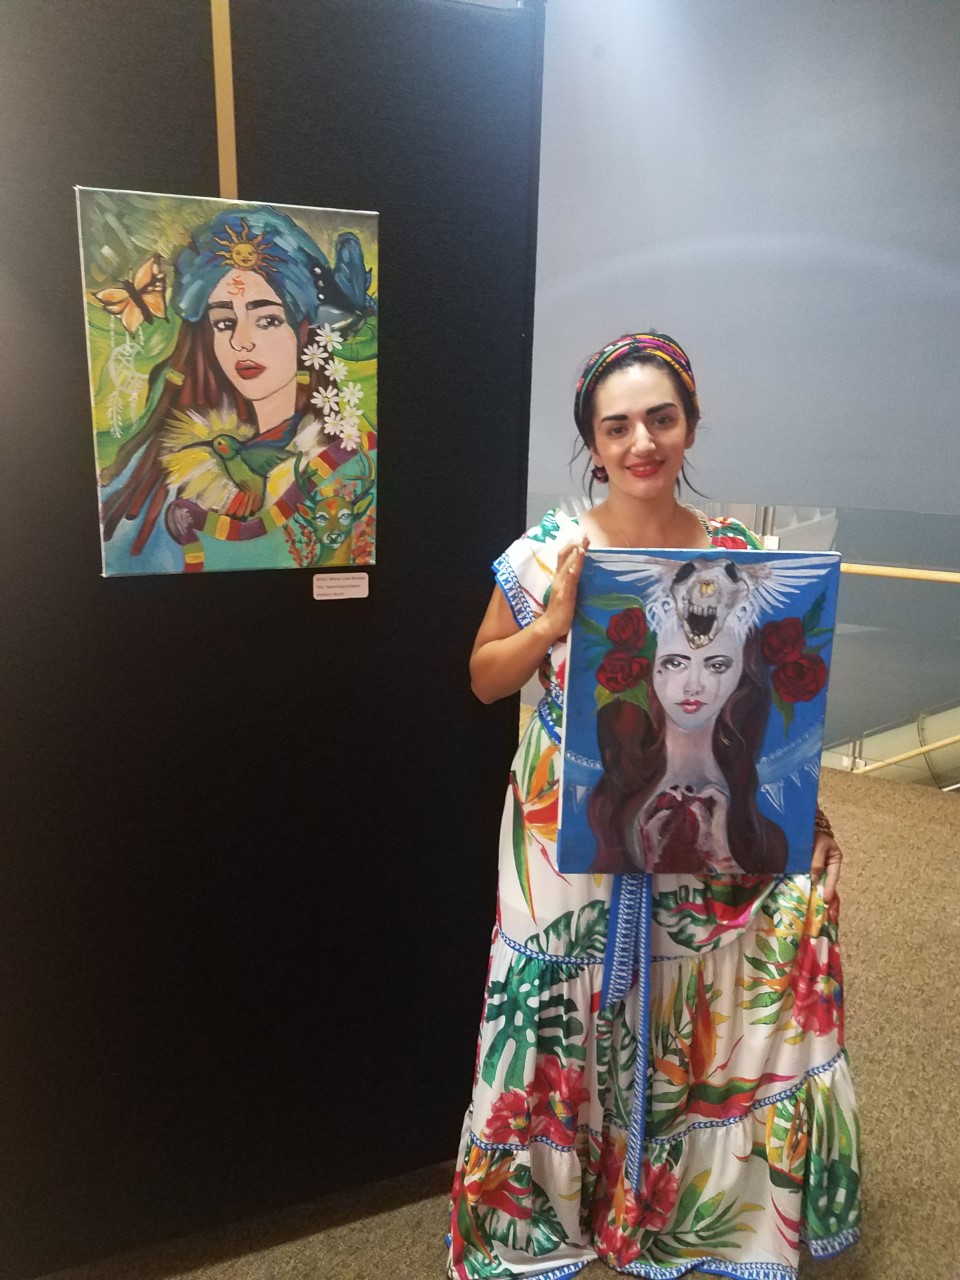 A woman dressed like Frida Kahlo holding up a painting by another painting.